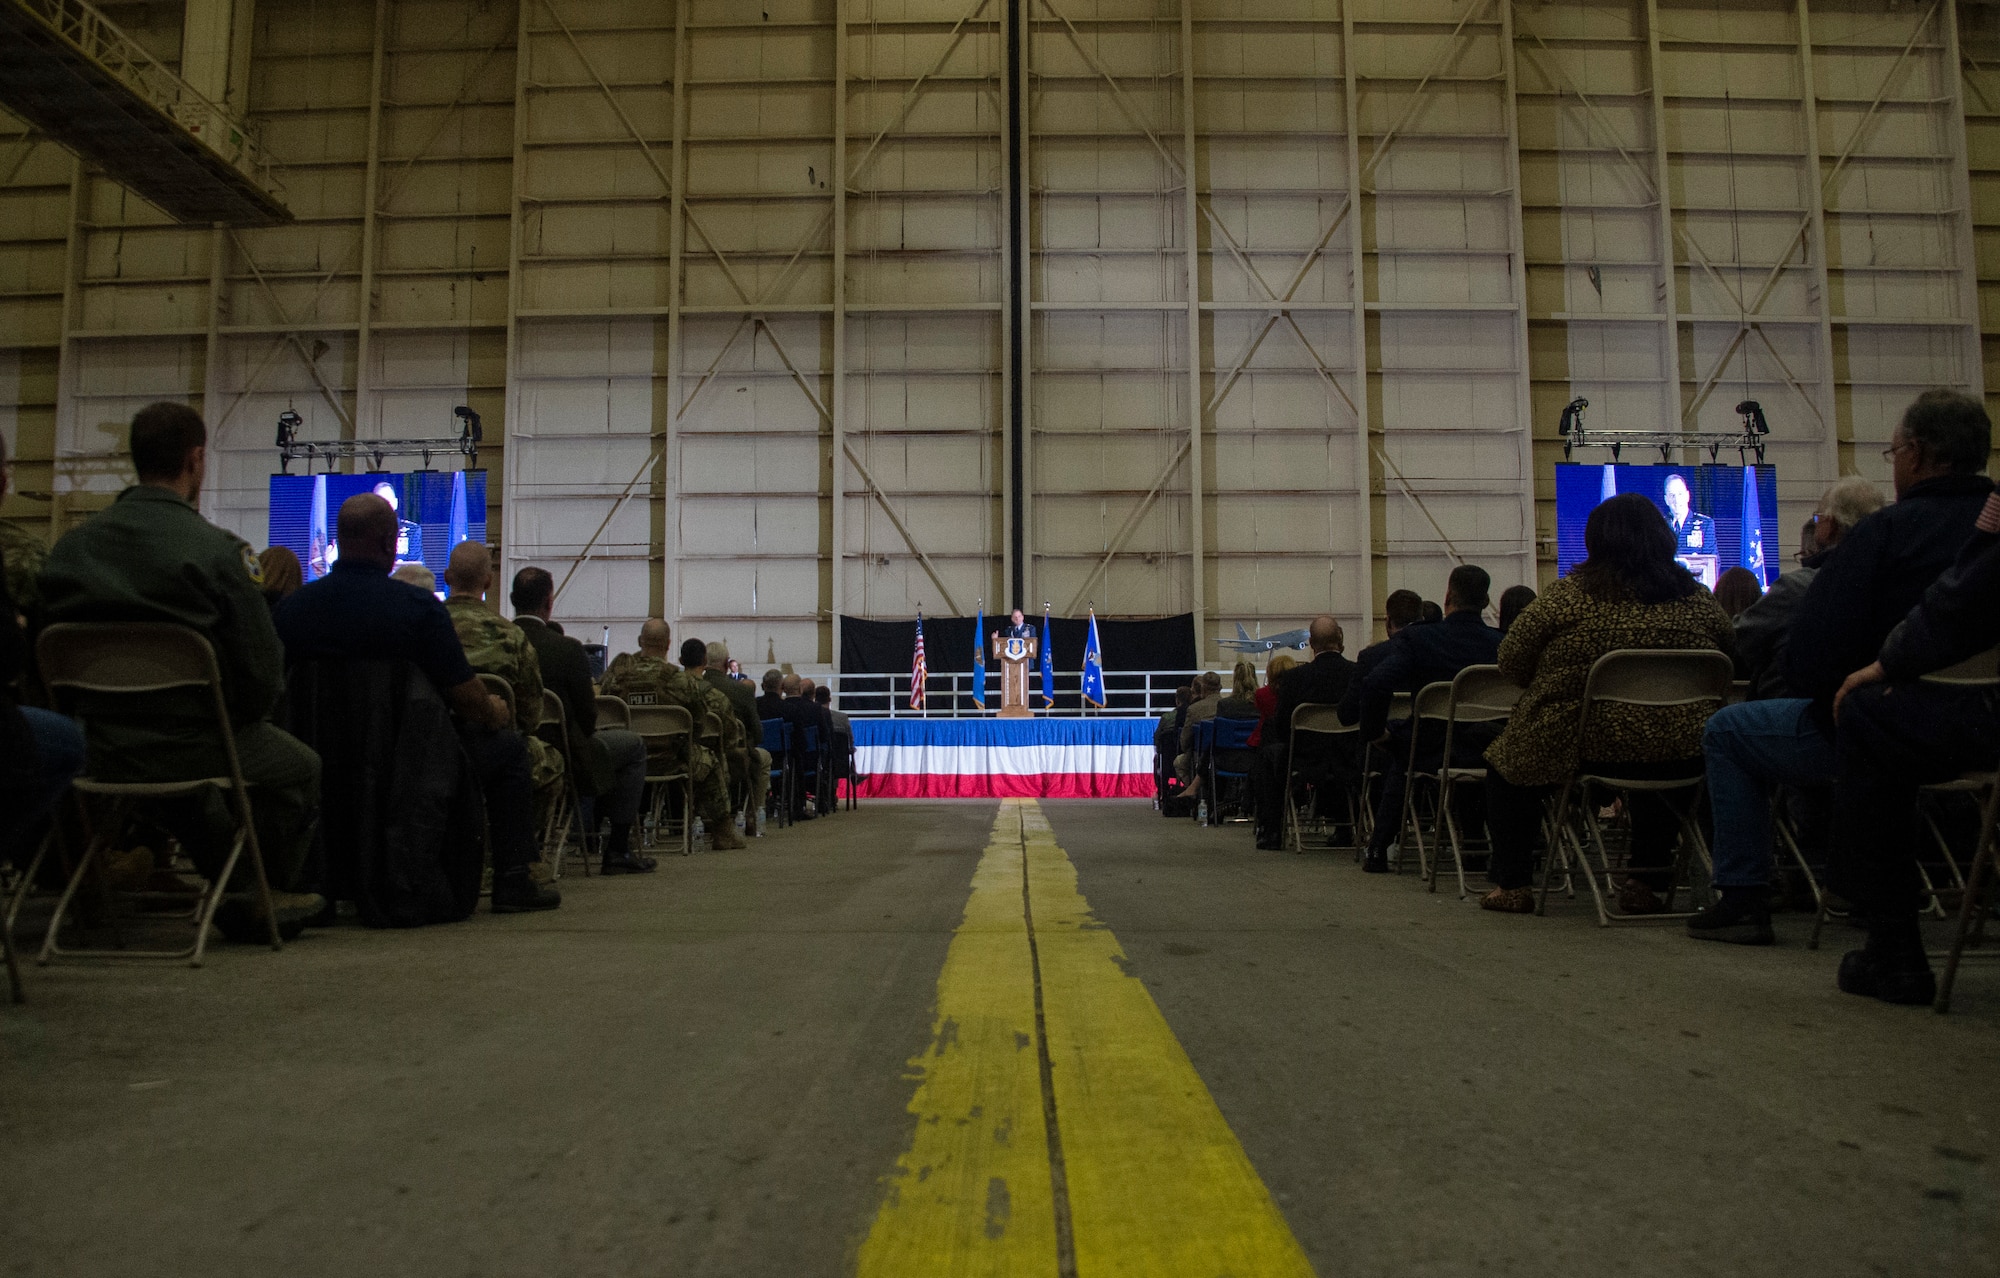 Members across the nation and the Altus community listen as Air Force Chief of Staff Gen. David L. Goldfein welcomes the Air Forces newest aircraft, the KC-46A Pegasus, Feb. 8, 2019, at Altus Air Force Base, Okla.